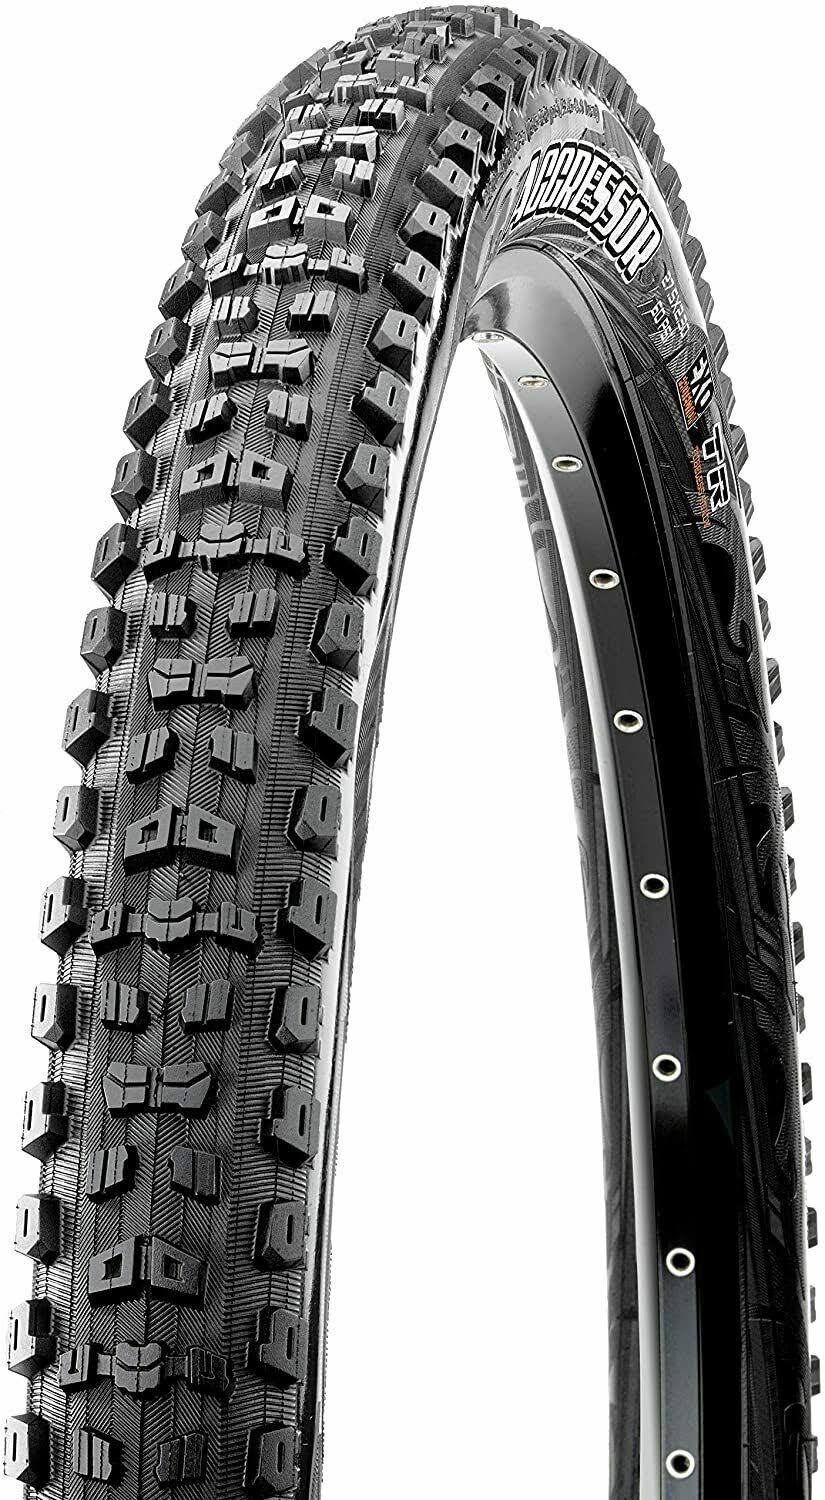 Maxxis Aggressor Dual Compound Exo Tubeless Folding Tire - 27.5" x 2.50"